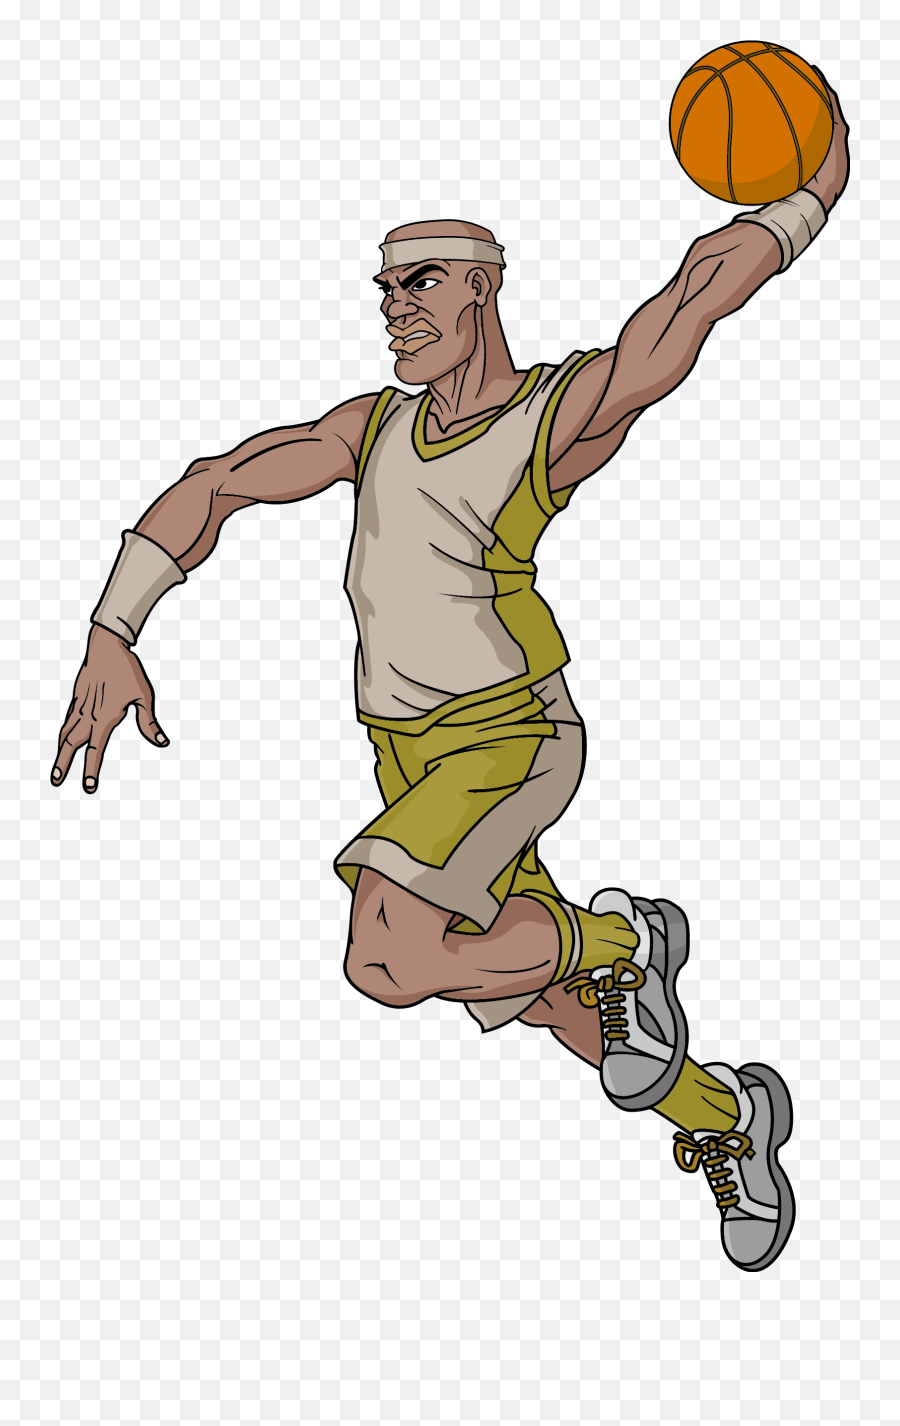 Cartoon Character Basketball Player - Male Basketball Player Cartoon With Muscles Emoji,Basketball Player Clipart